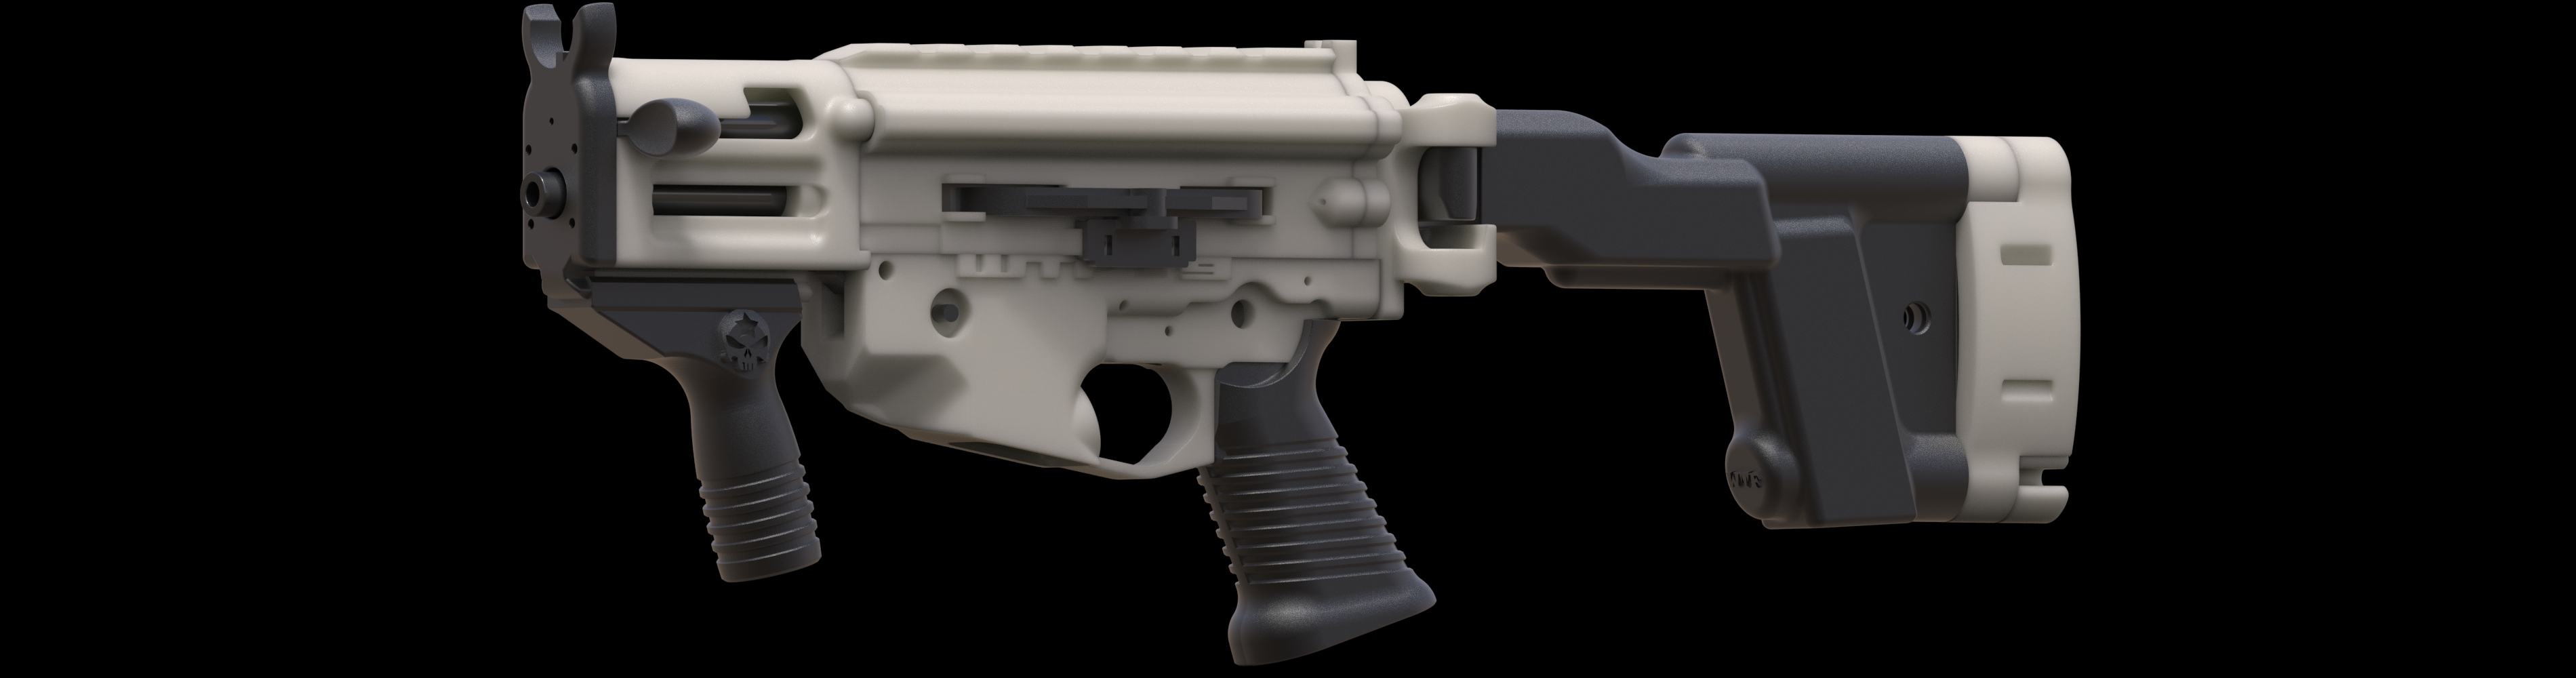 MP5K style foregrip | DEFCAD